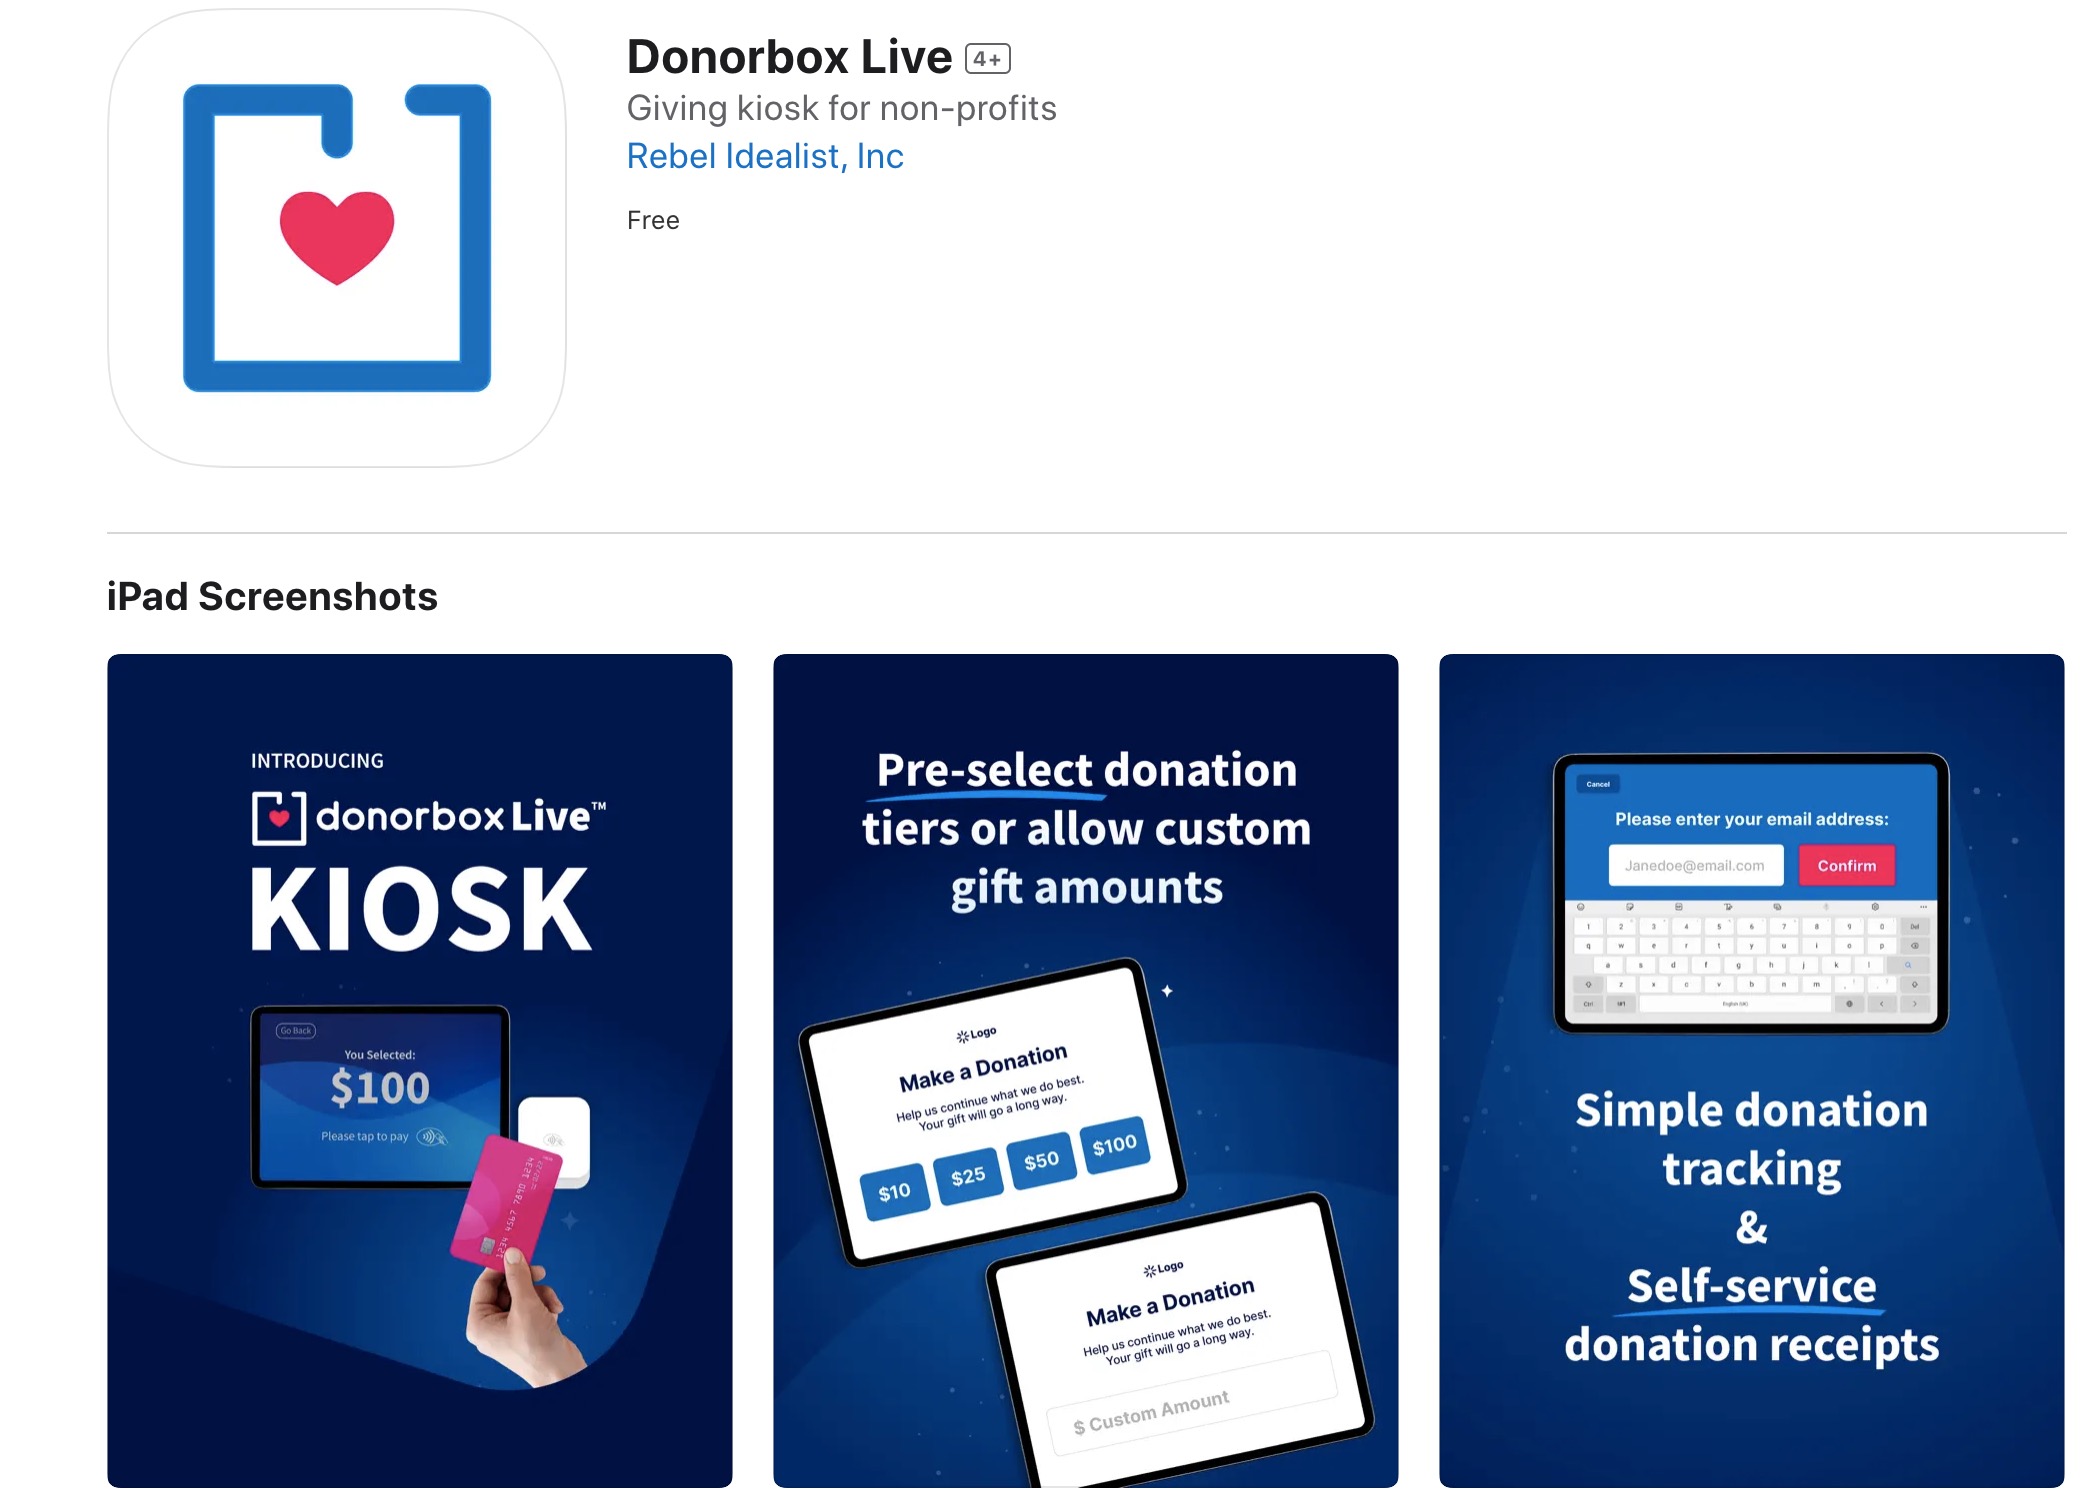 The Donorbox Live app as it appears in the Apple App Store for iPads.